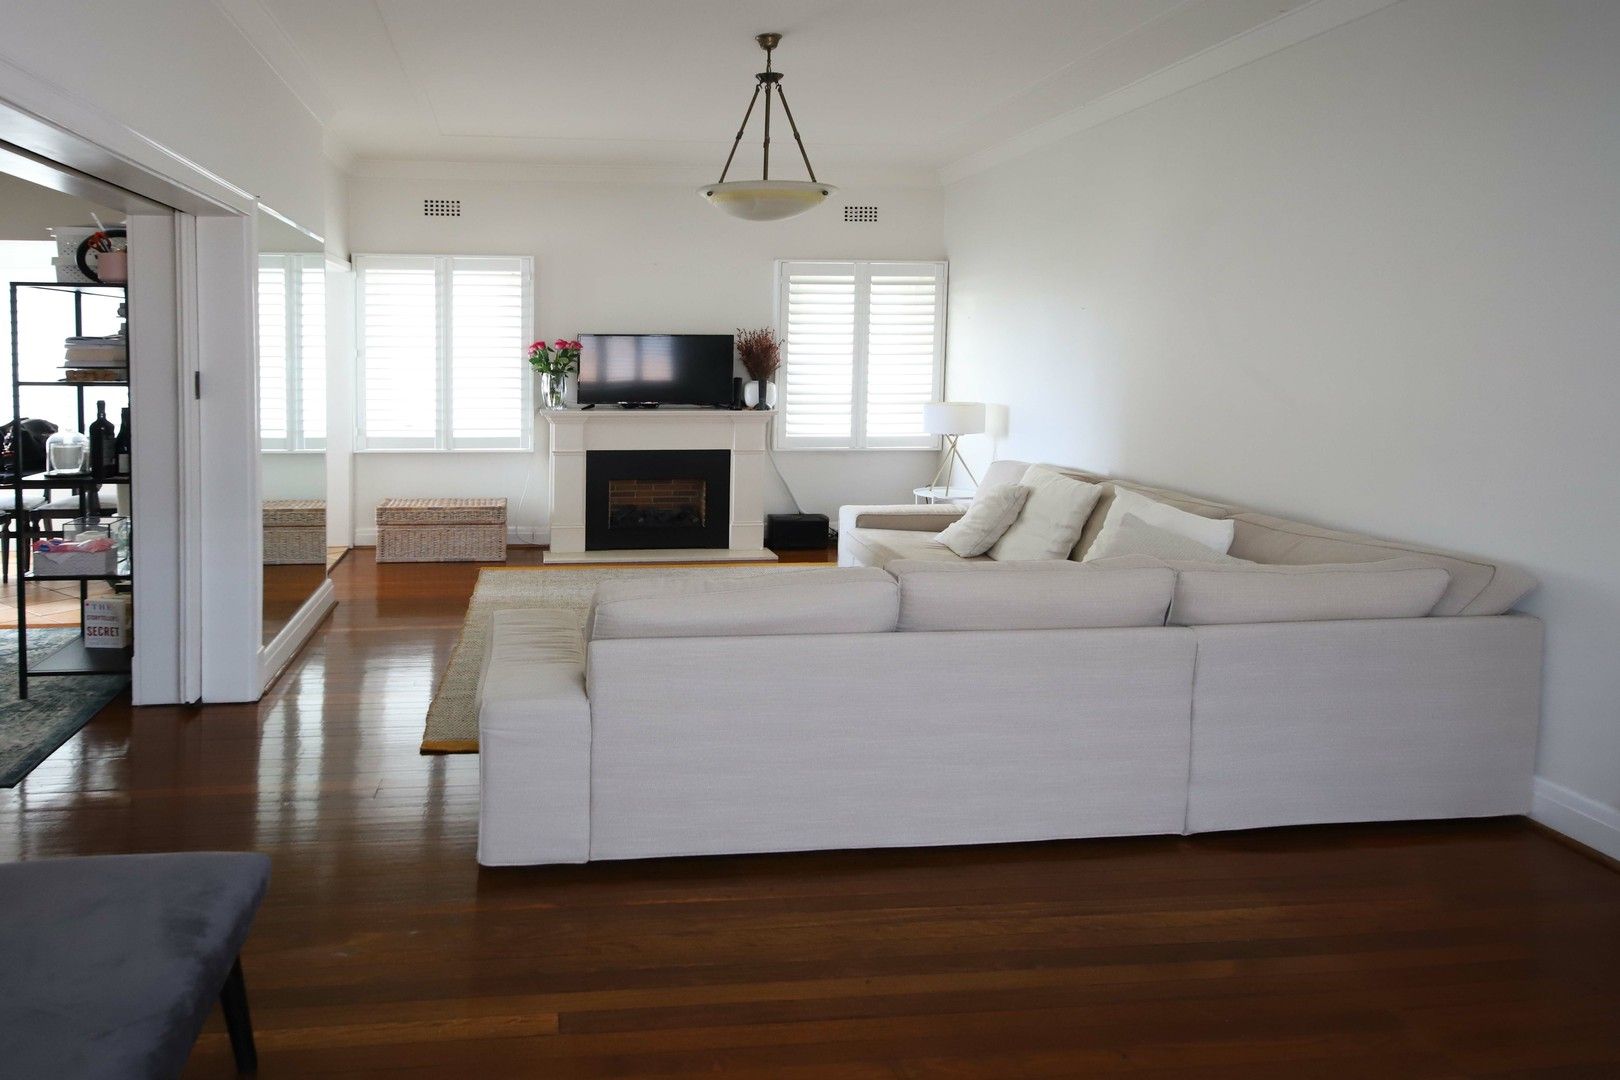 2 bedrooms Apartment / Unit / Flat in Unit 3/16A Darling Point Rd DARLING POINT NSW, 2027